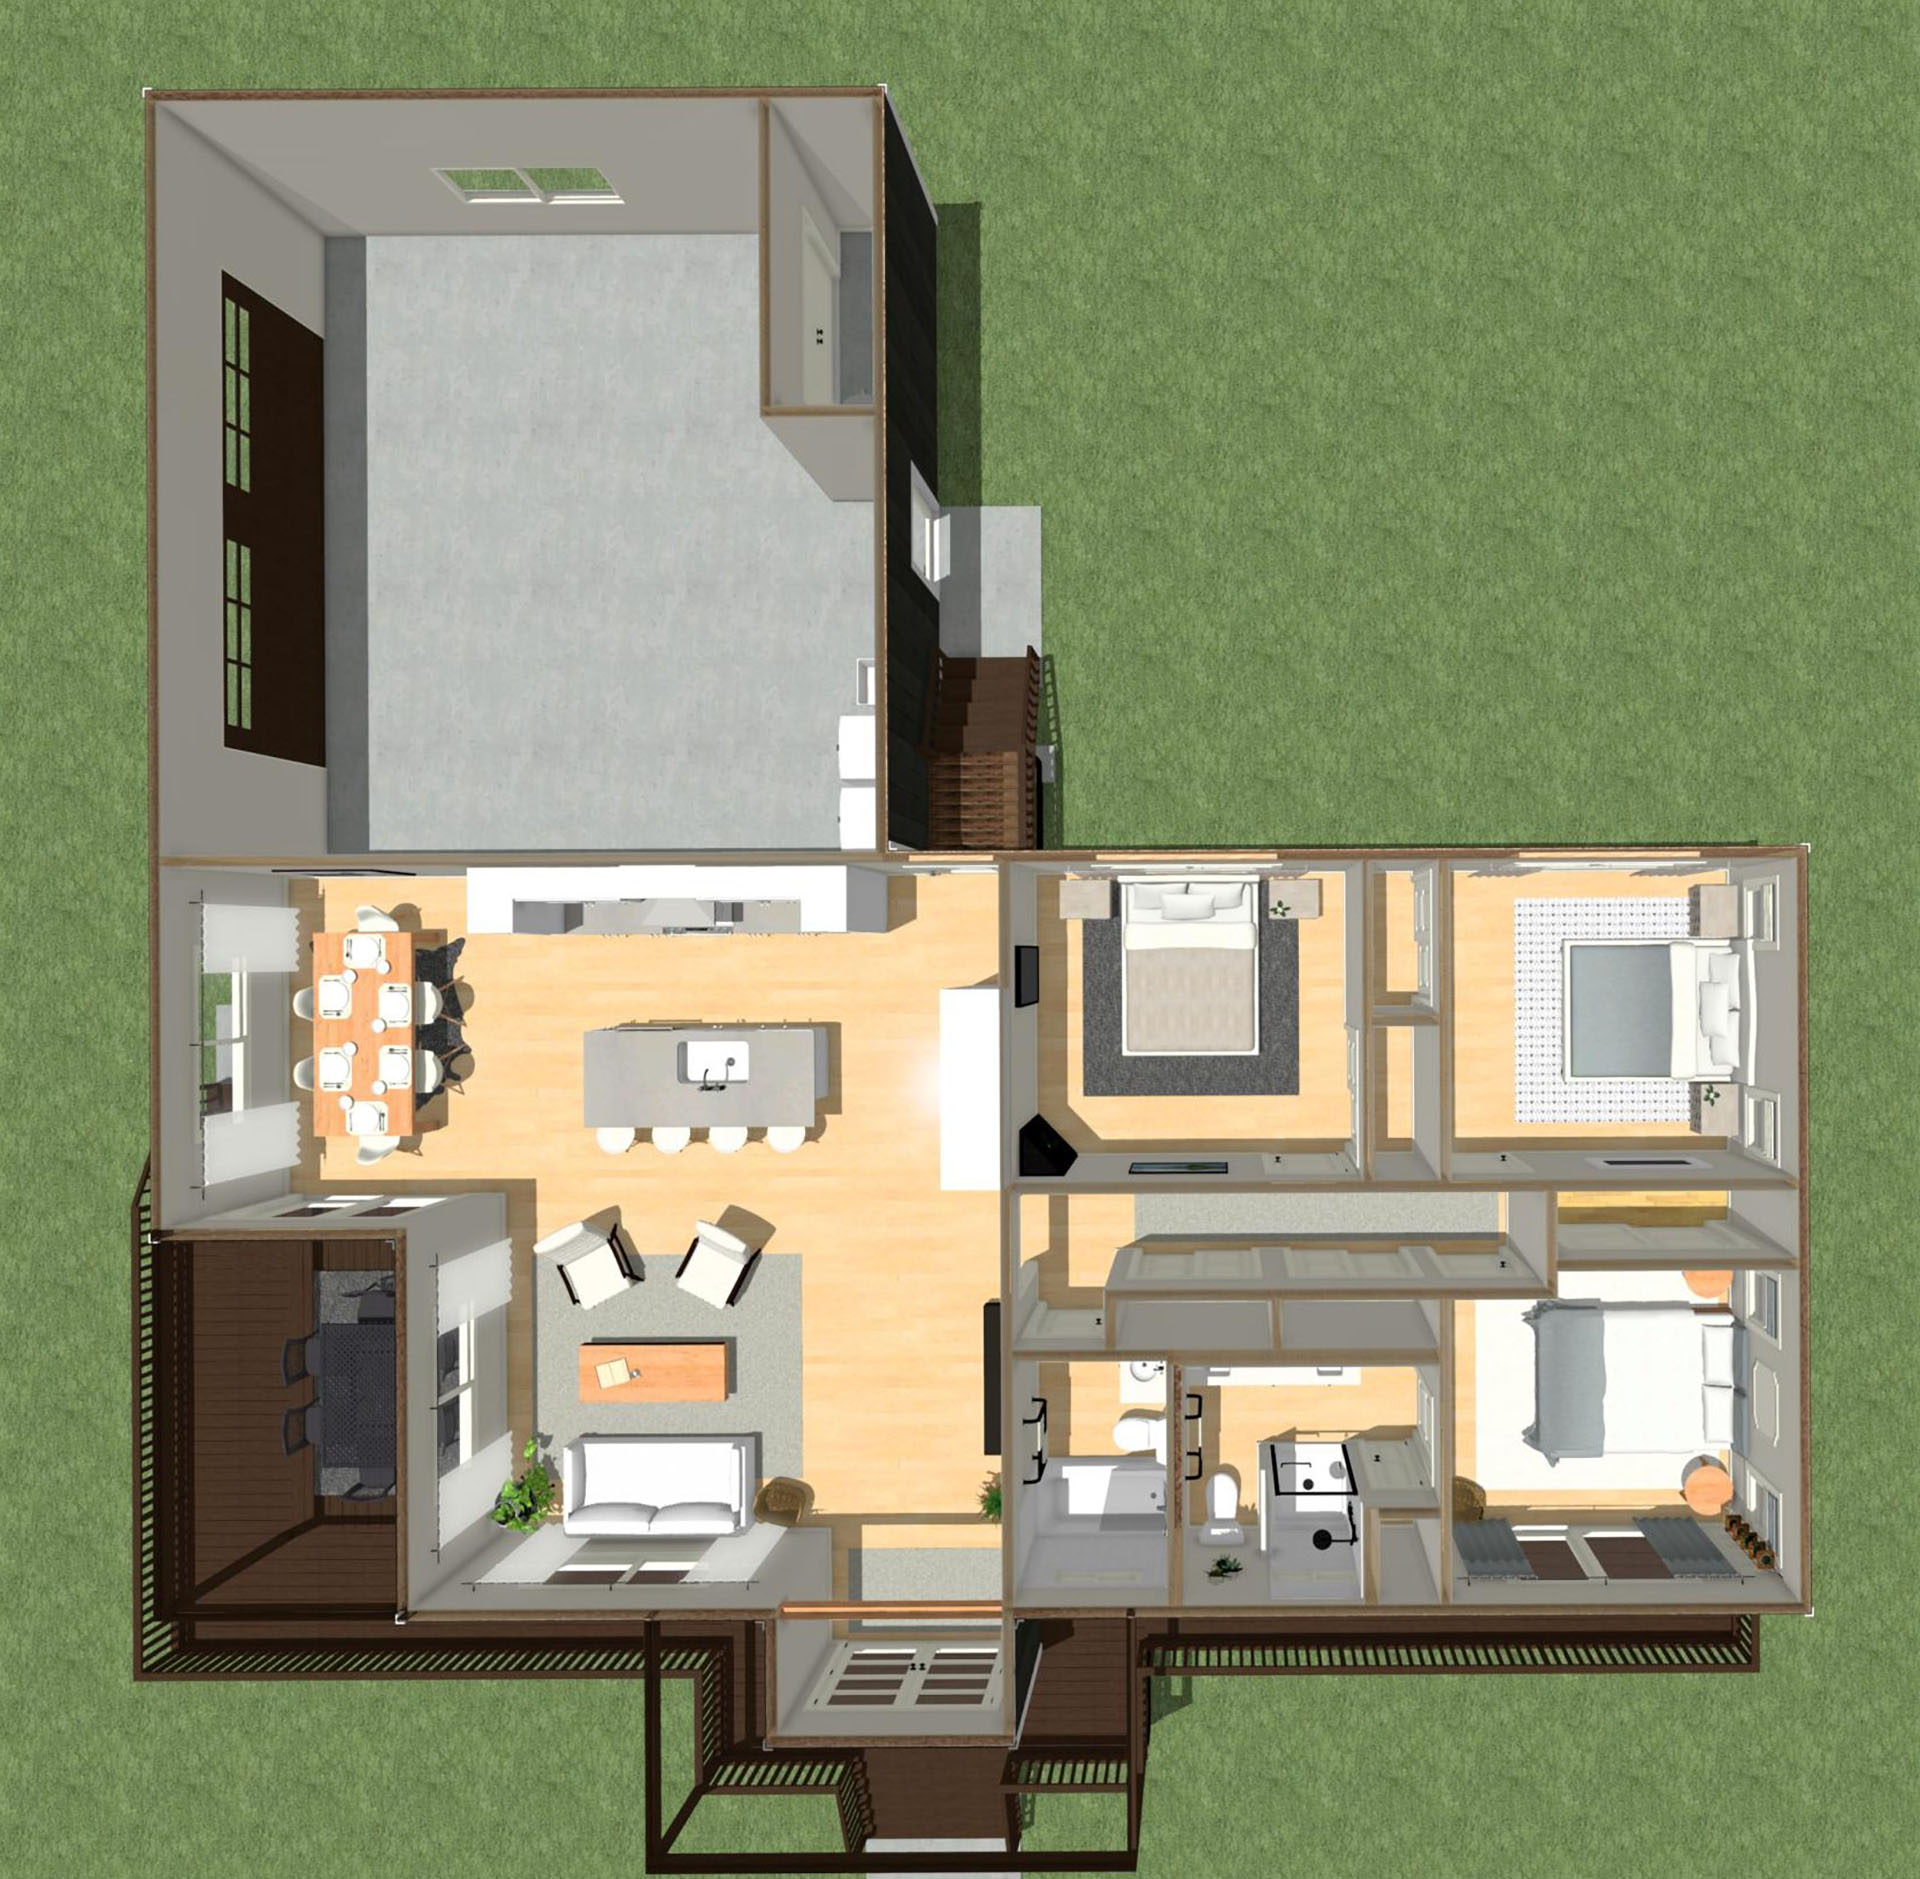 Hokulani floor plan overview zoomed out